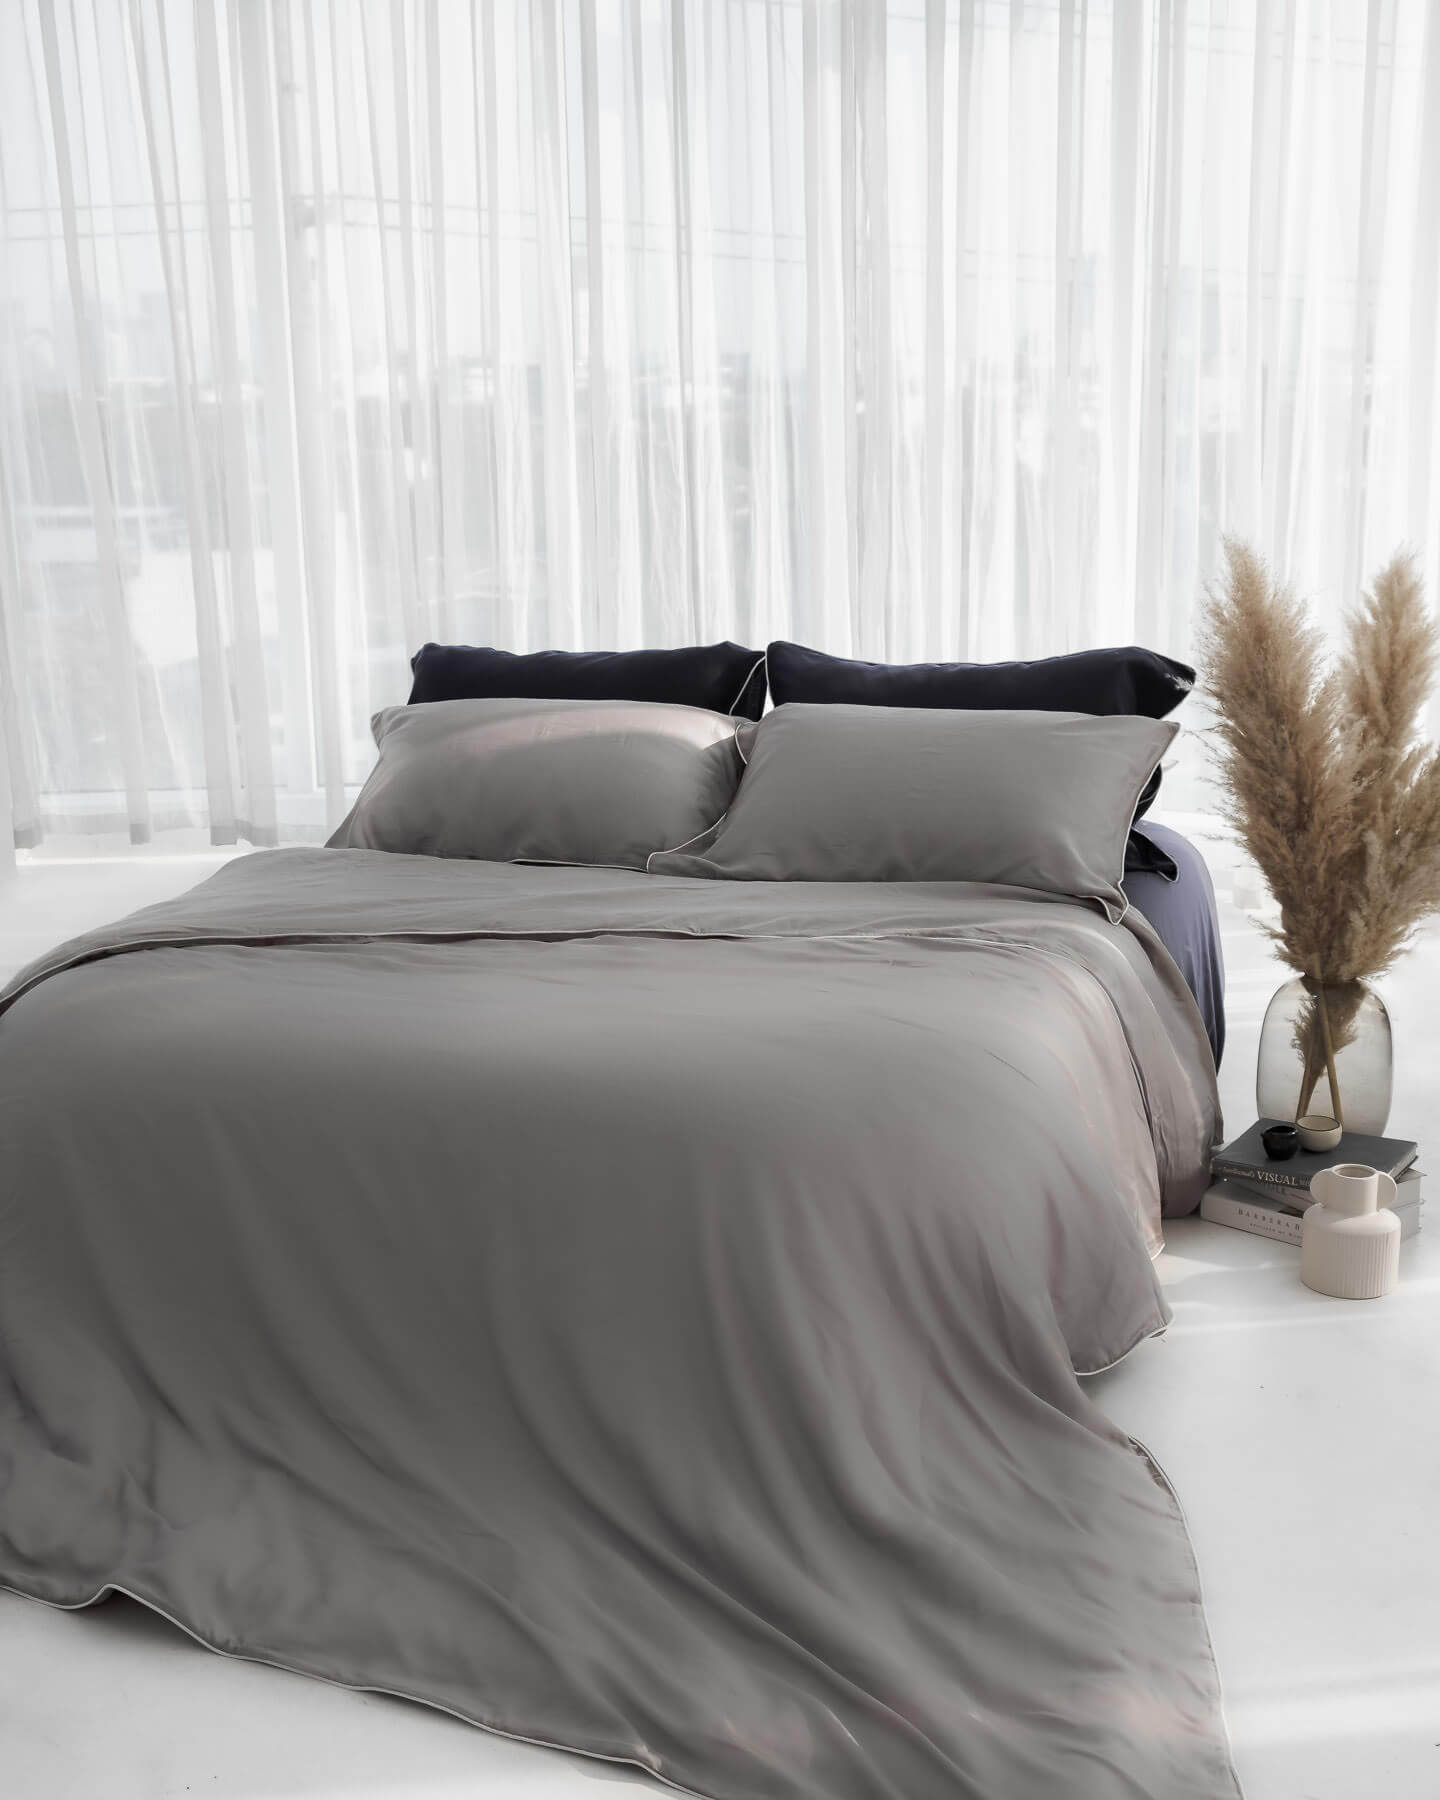 organic bamboo lyocell duvet cover and sheet set (fitted sheet and pillowcases) in urban oasis (gray with white piping) and ocean (navy with white piping). ava and ava ph soft and cooling bedding sheets.